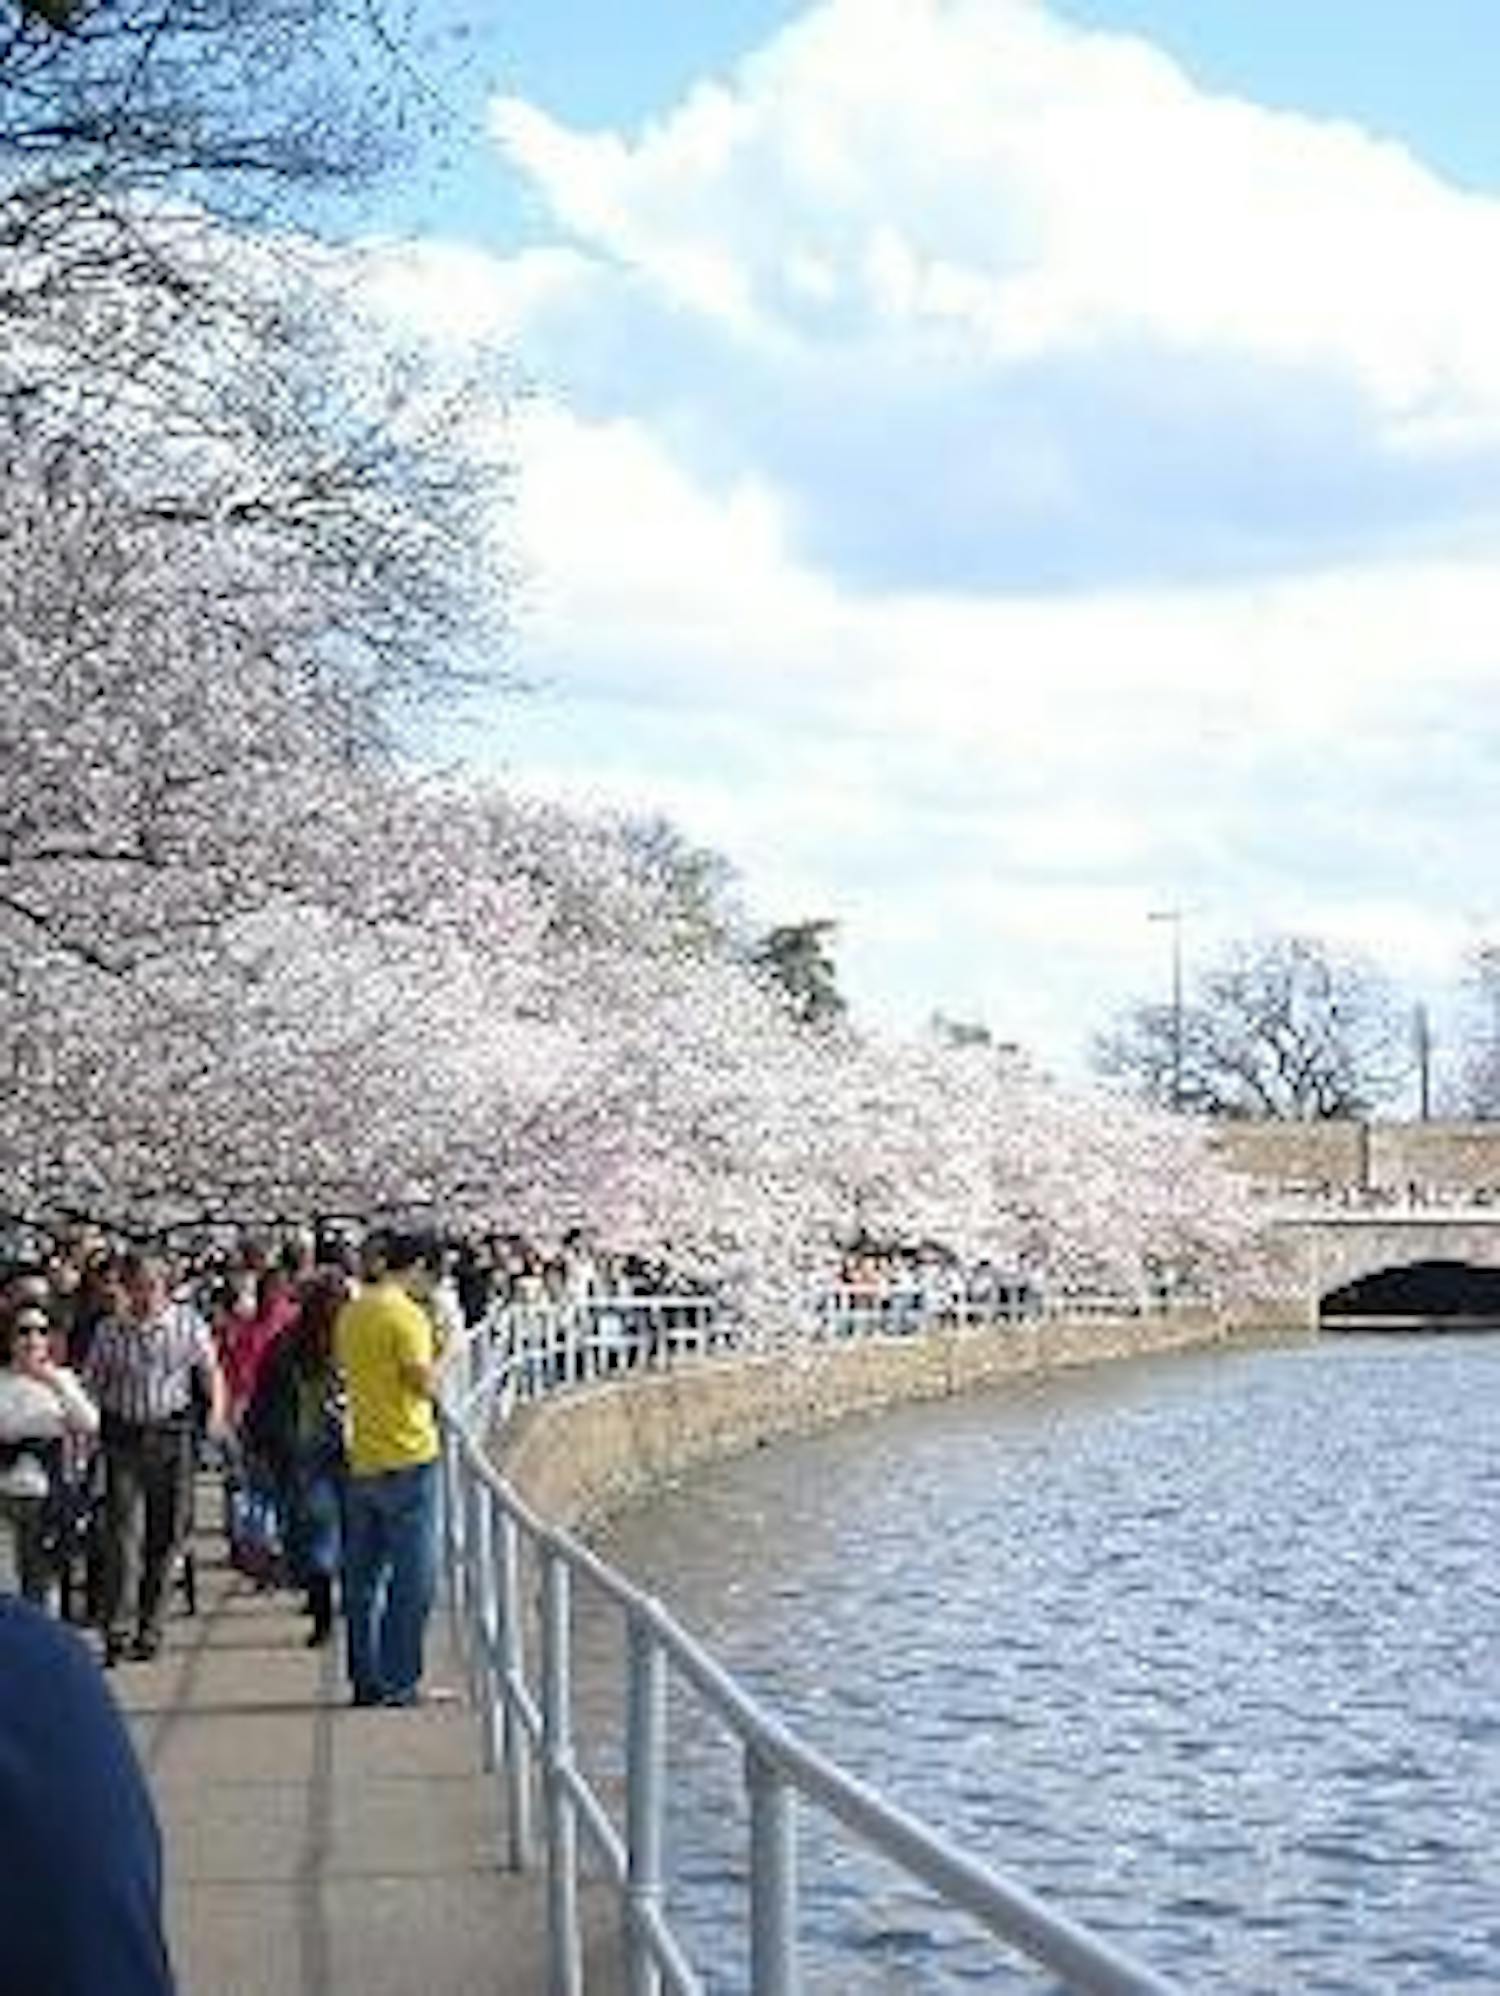 All IN BLOOM - Tourists crowd the Tidal Basin to admire the seasonal sight during what experts marked as the peak bloom period of the cherry trees. Two weekends of festivities took place in the District to commemorate the arrival of spring, including the 